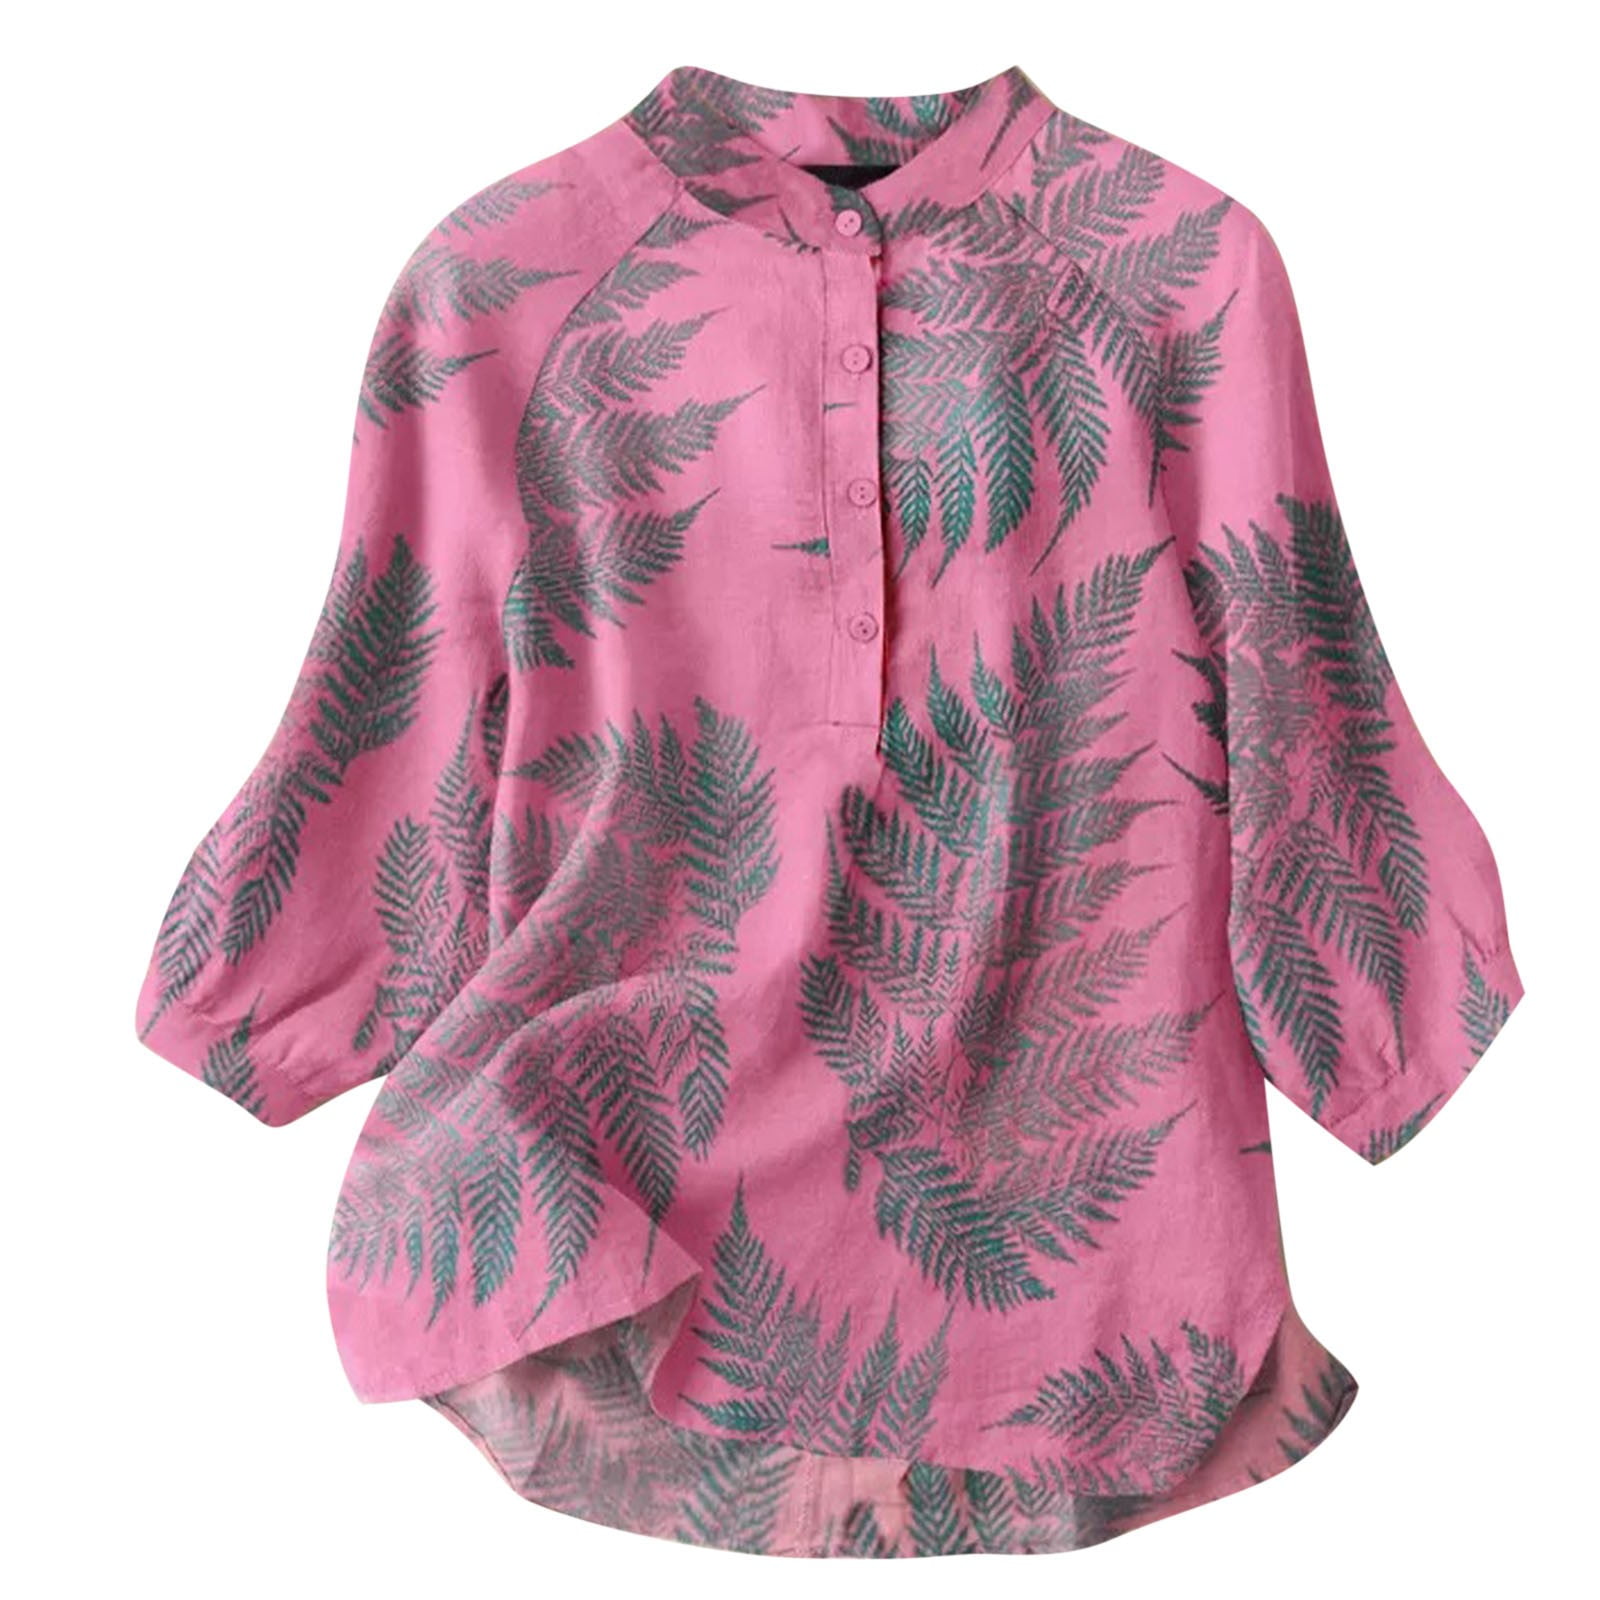 Lastesso Womens Cozy Cotton Line Blouse Tops Palm Leaf Floral Print Shirts  with Buttons Lantern Sleeve Tunic Shirt Loose Clothes 